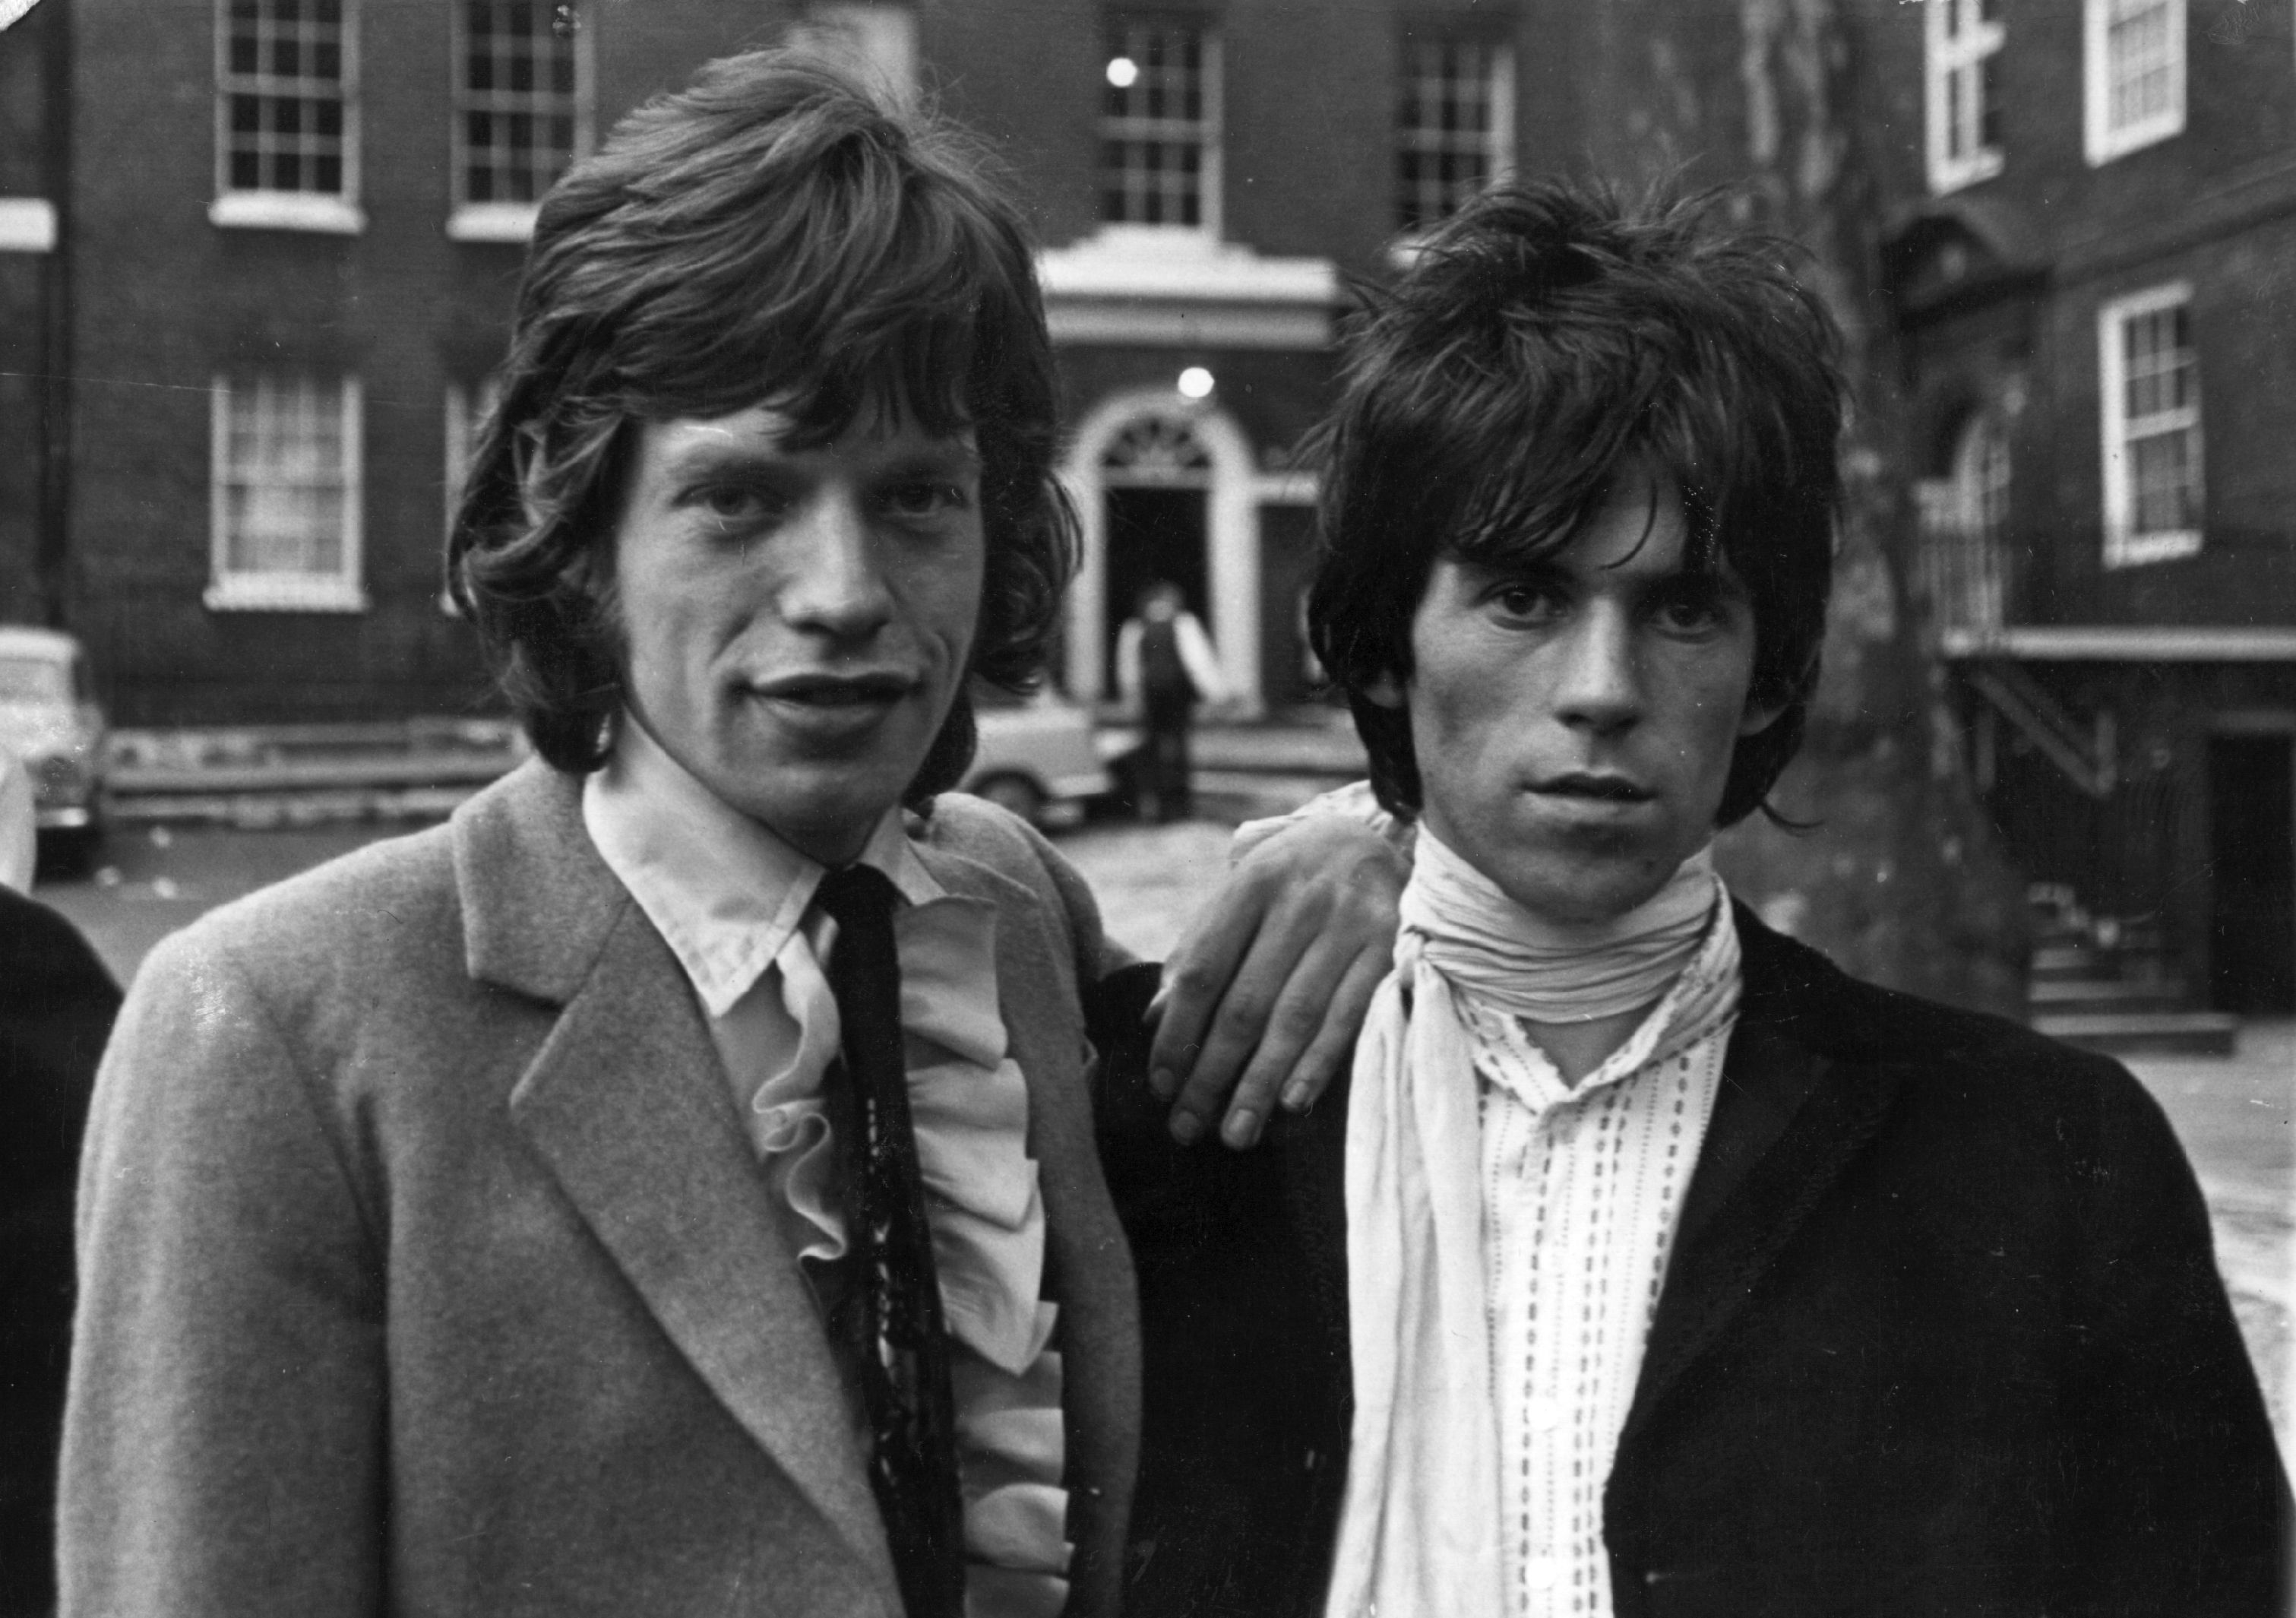 The Rolling Stones' Mick Jagger and Keith Richards standing in front of a building